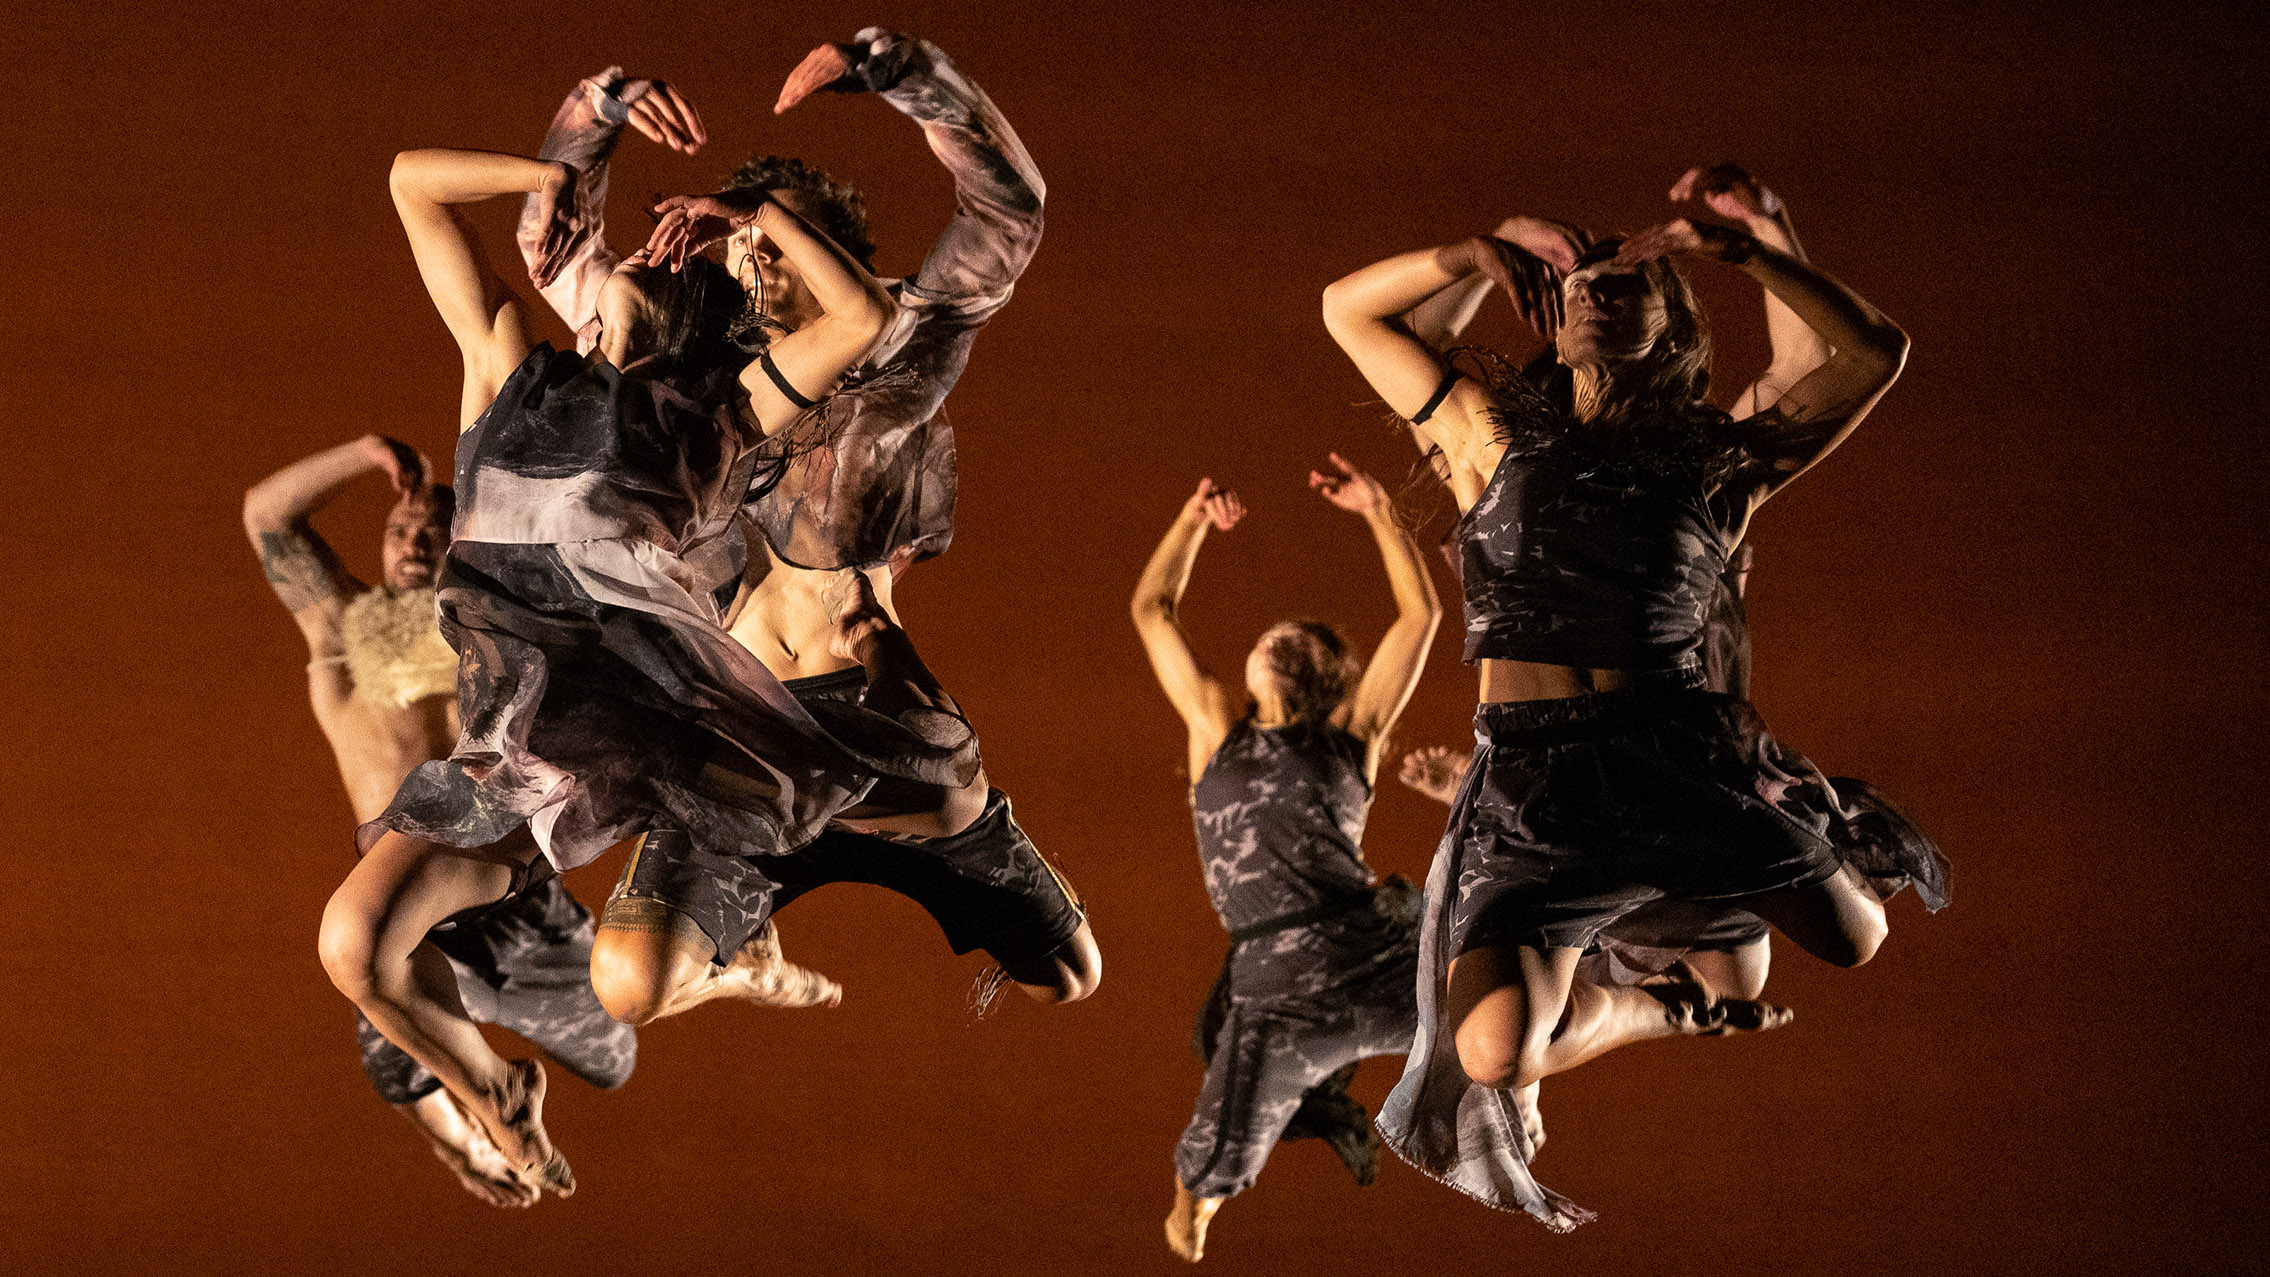 A group of dancers leap in the air against a red backdrop.